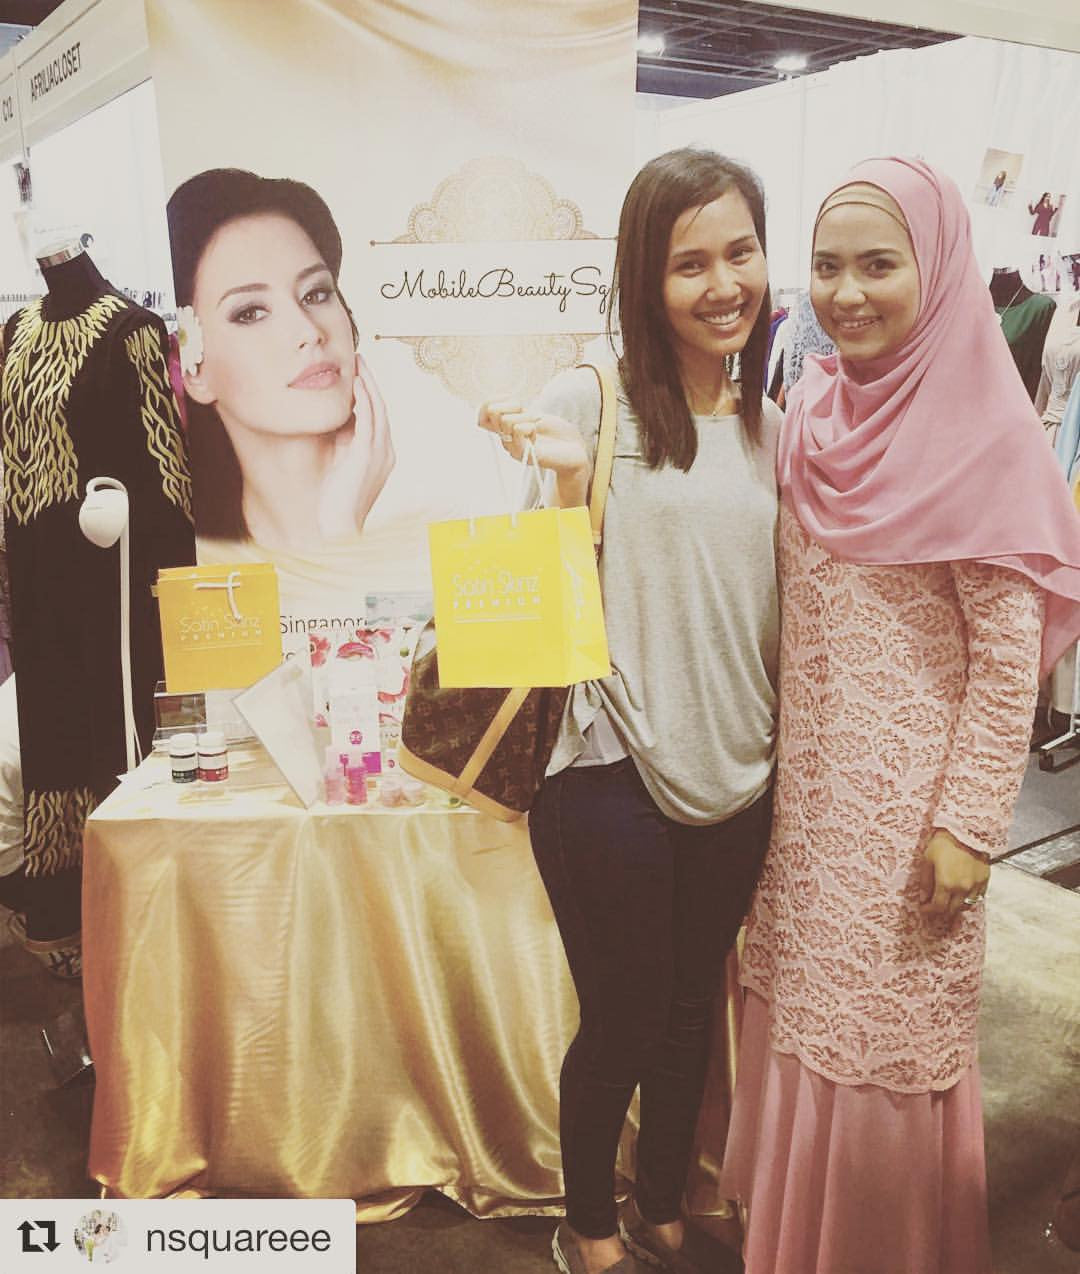 Its always a pleasure to meet  our lovely followers and customers during Flea!